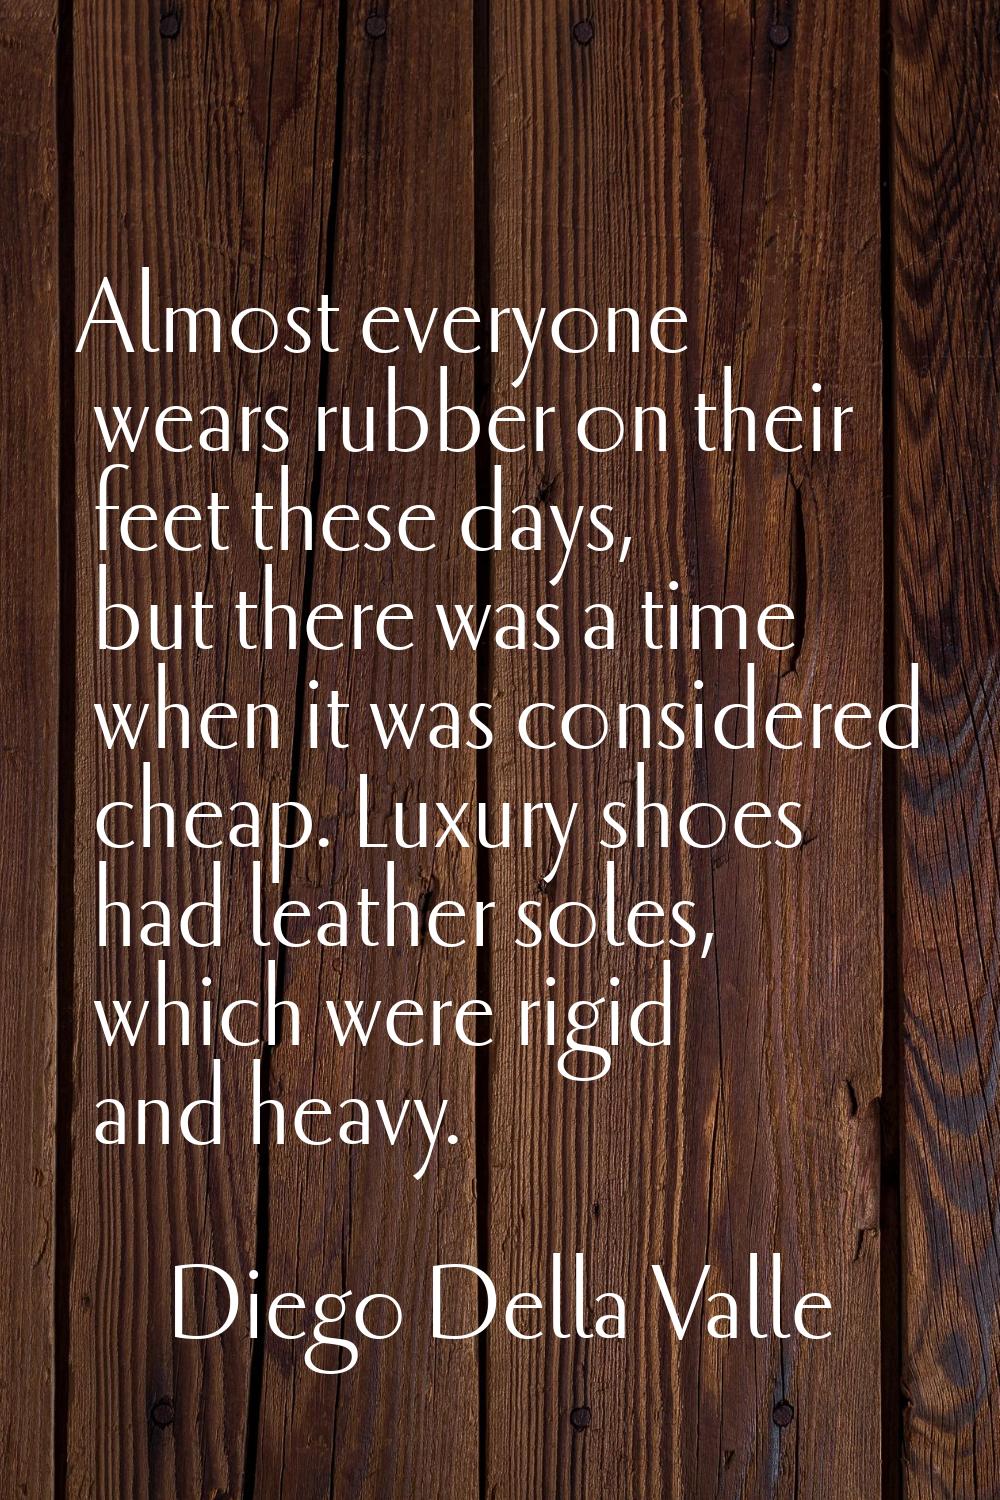 Almost everyone wears rubber on their feet these days, but there was a time when it was considered 